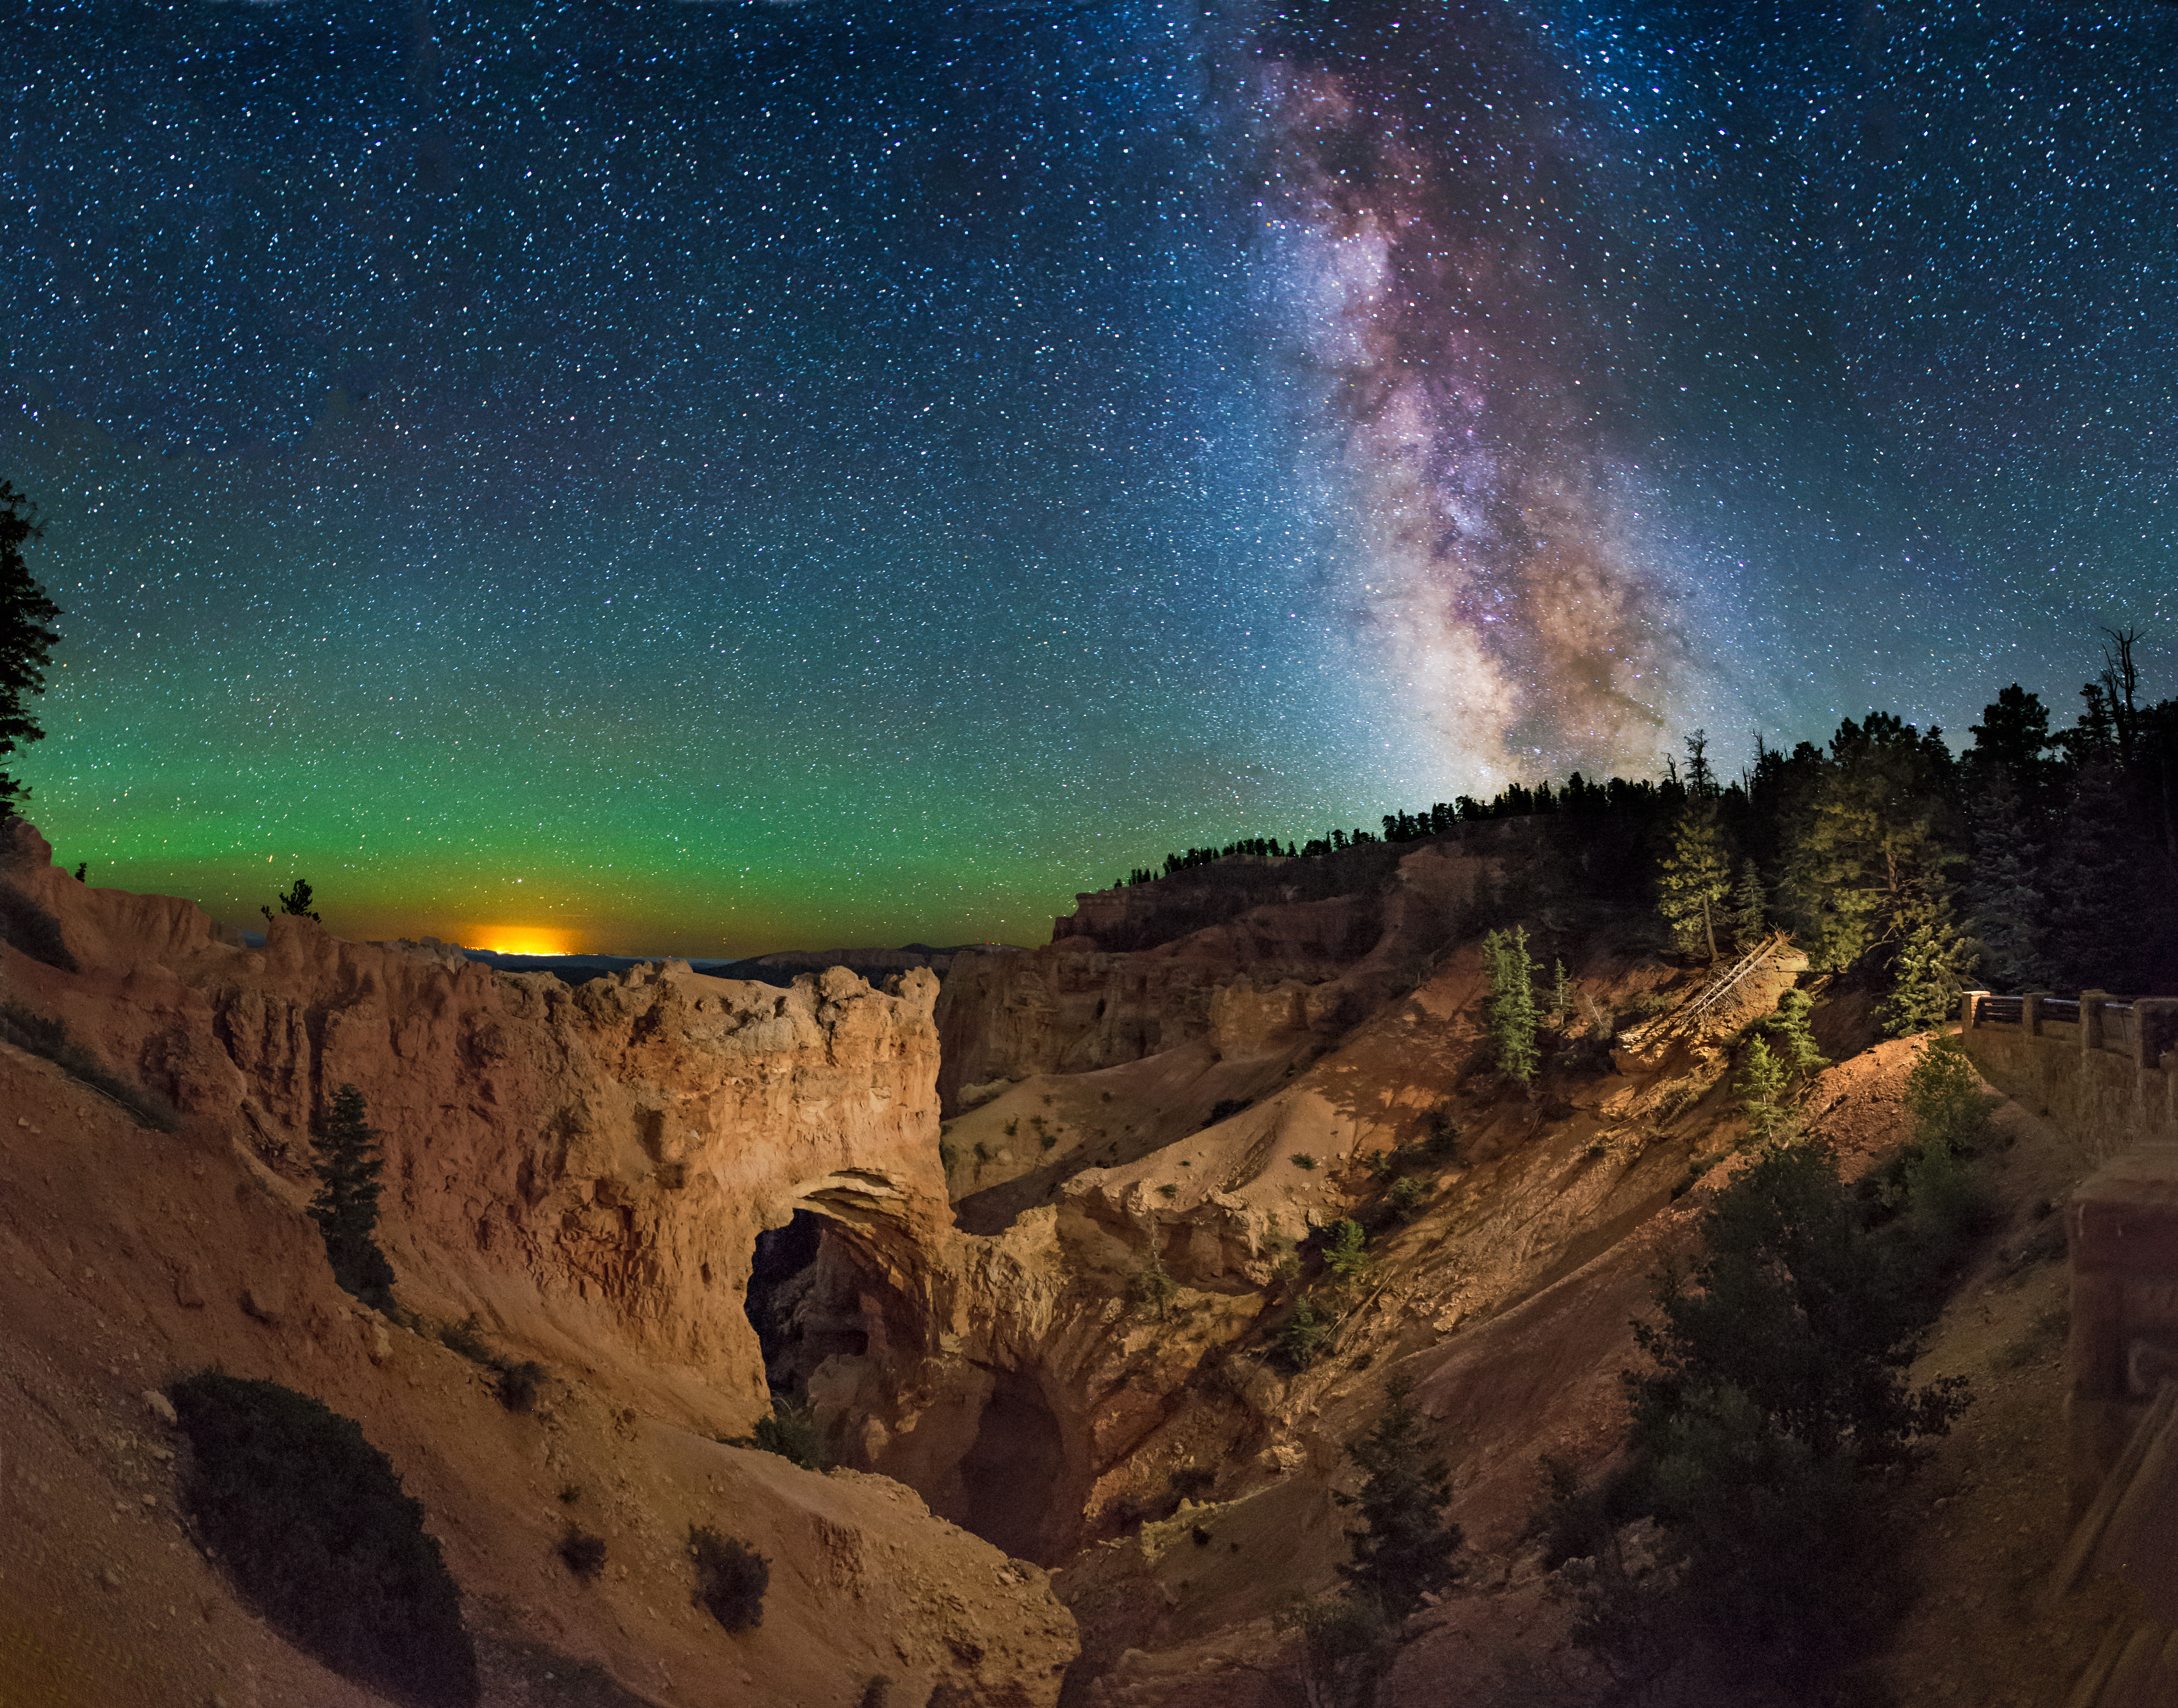 Natural Bridge Arch in Bryca Canyon National Park, with the Milky Way above. This is a panorama of 8 vertical images taken with a Canon 6D camera, Canon 16-35 mm 2.8 lens at 16 mm, f/2.8, 30 sec exposures, and ISO 6400. Hope you enjoy! After Midnight Landscapes //Facebook